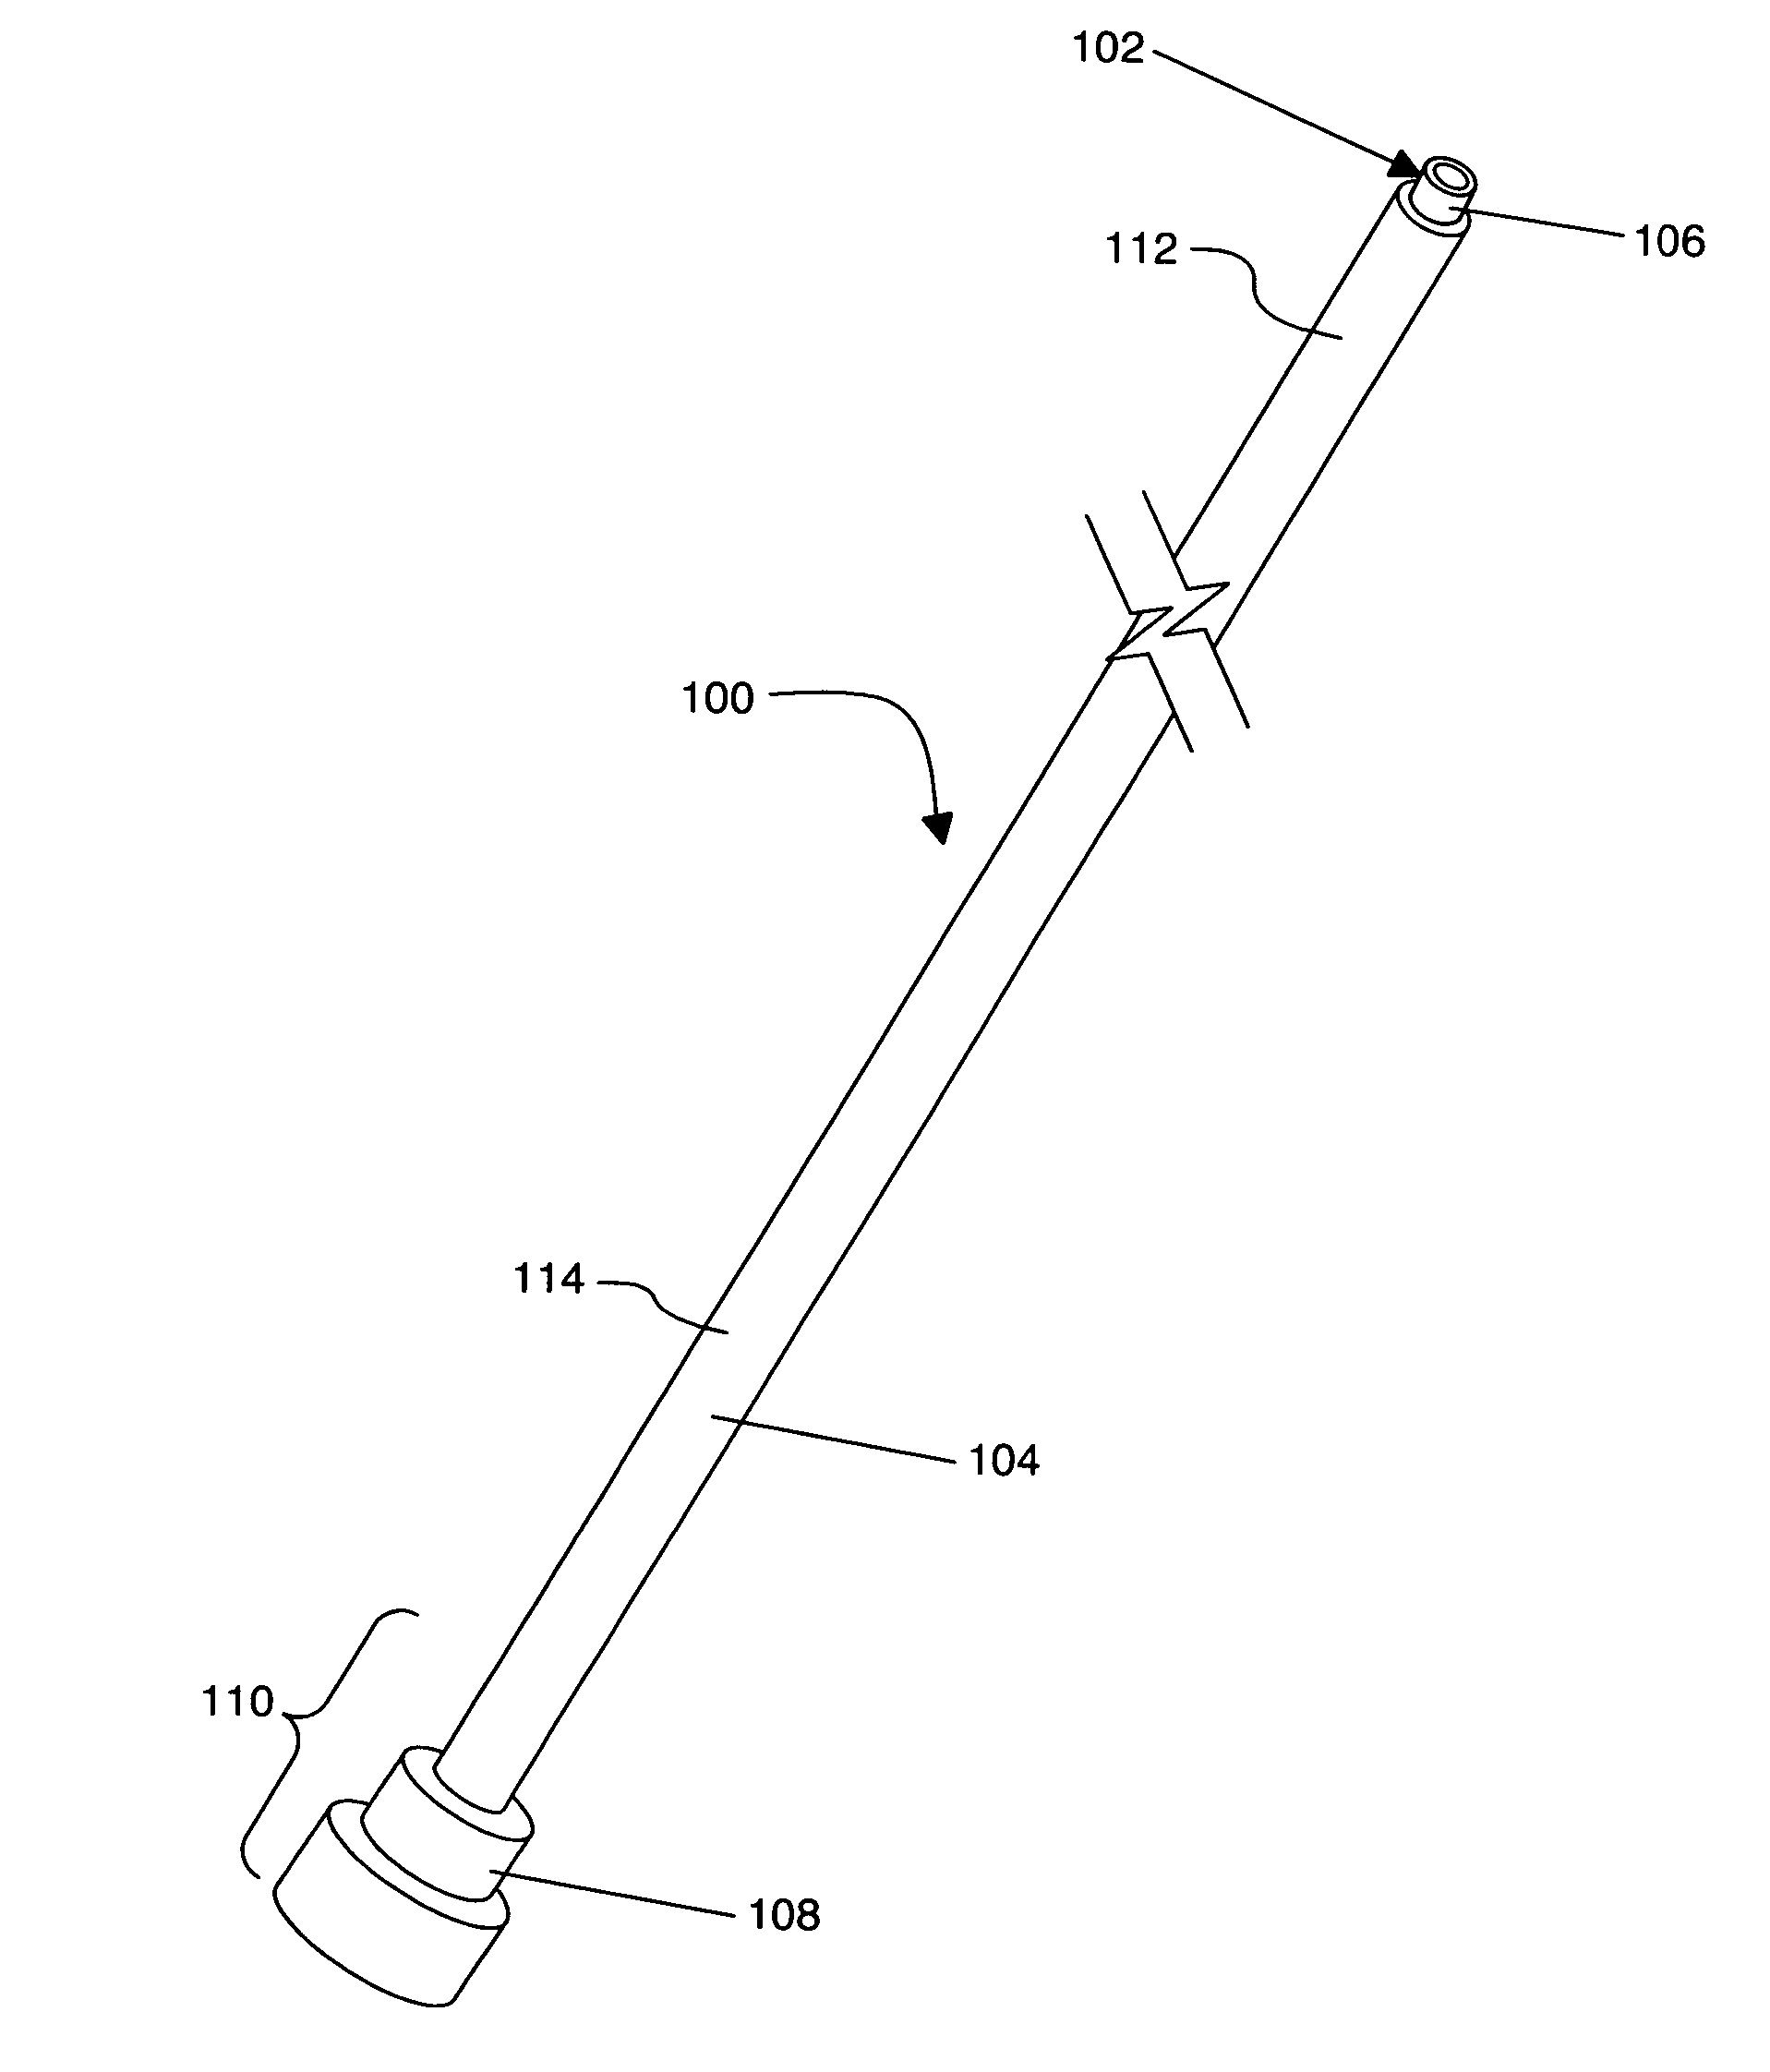 Radiofrequency perforation apparatus